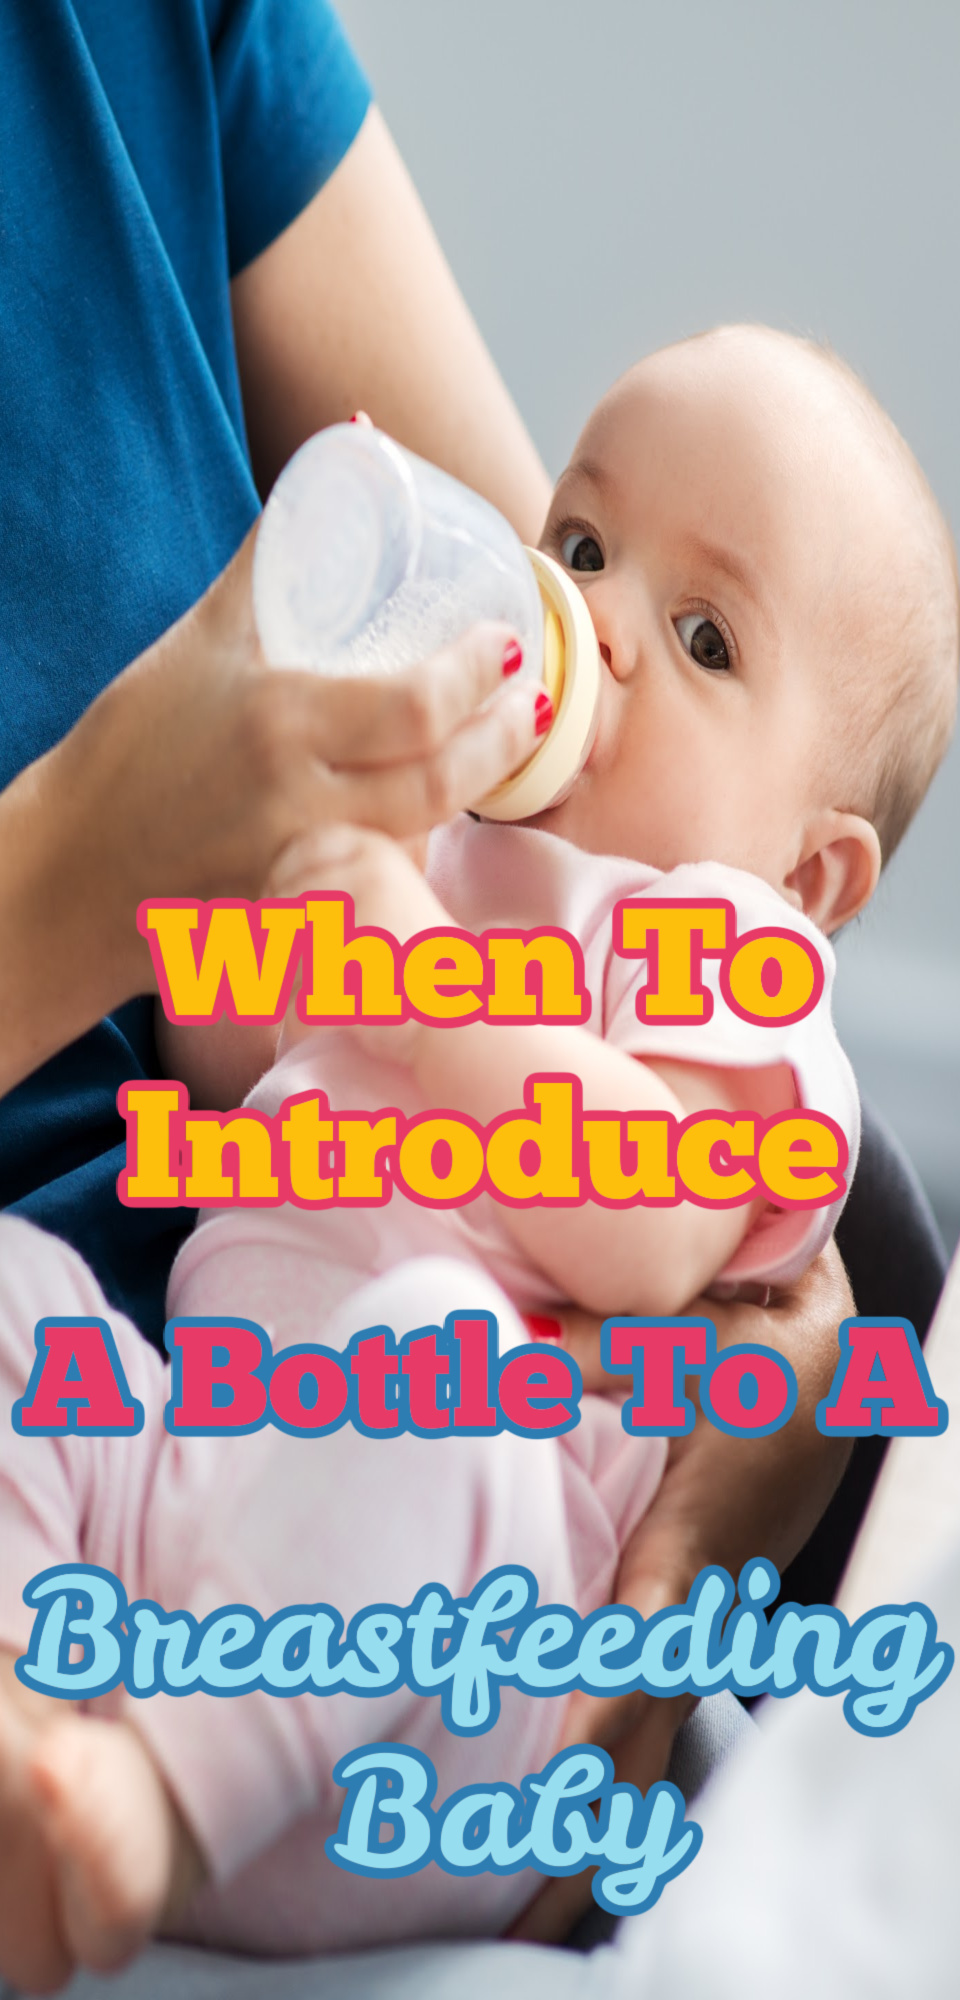 When to Introduce a Bottle To A Breastfeeding Baby